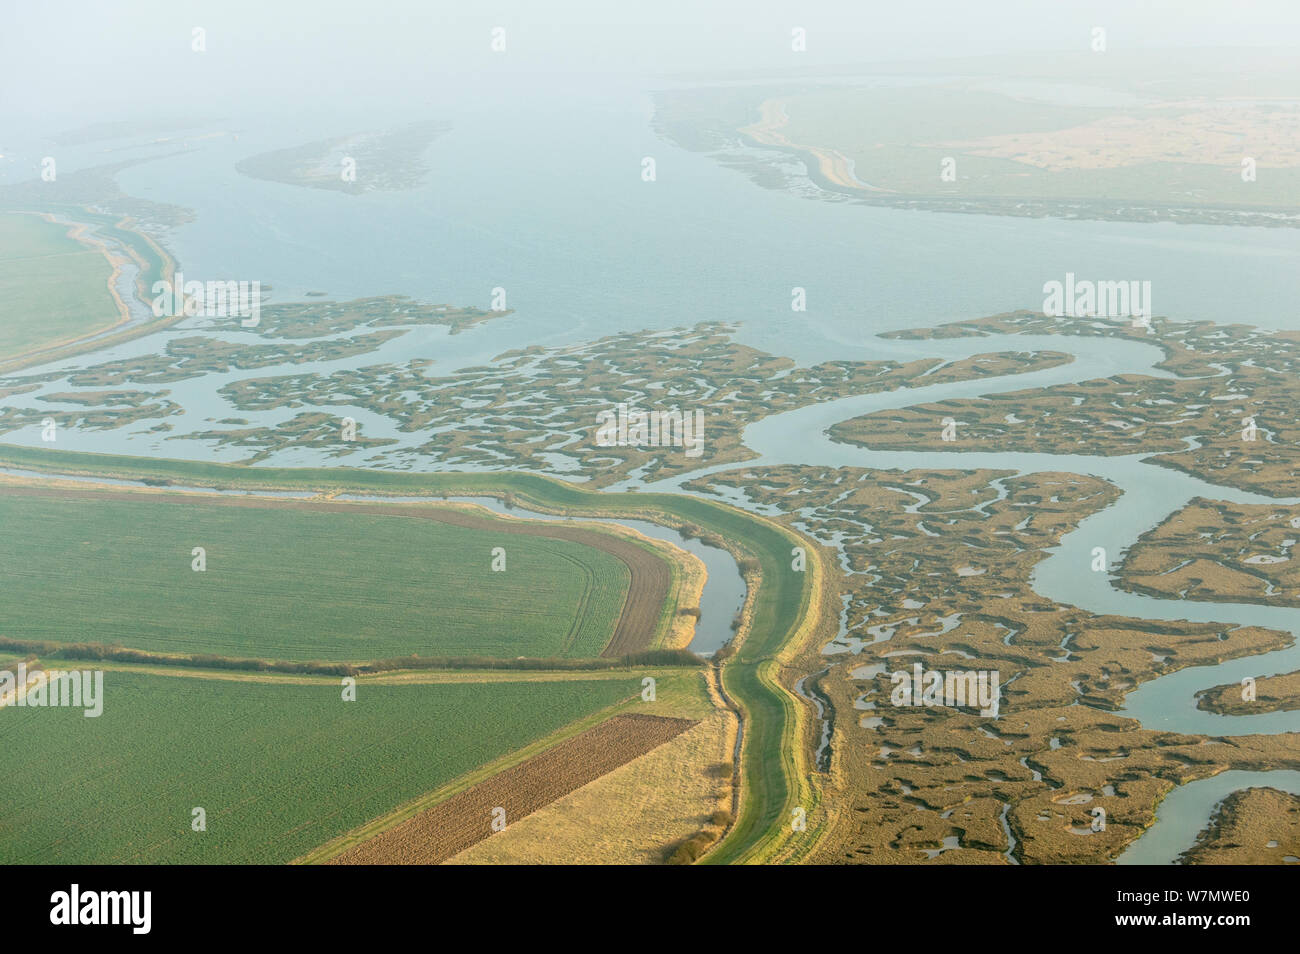 Water channels making patterns in saltmarsh, seen from the air. Abbotts Hall Farm, Essex, UK, April 2012. Stock Photo